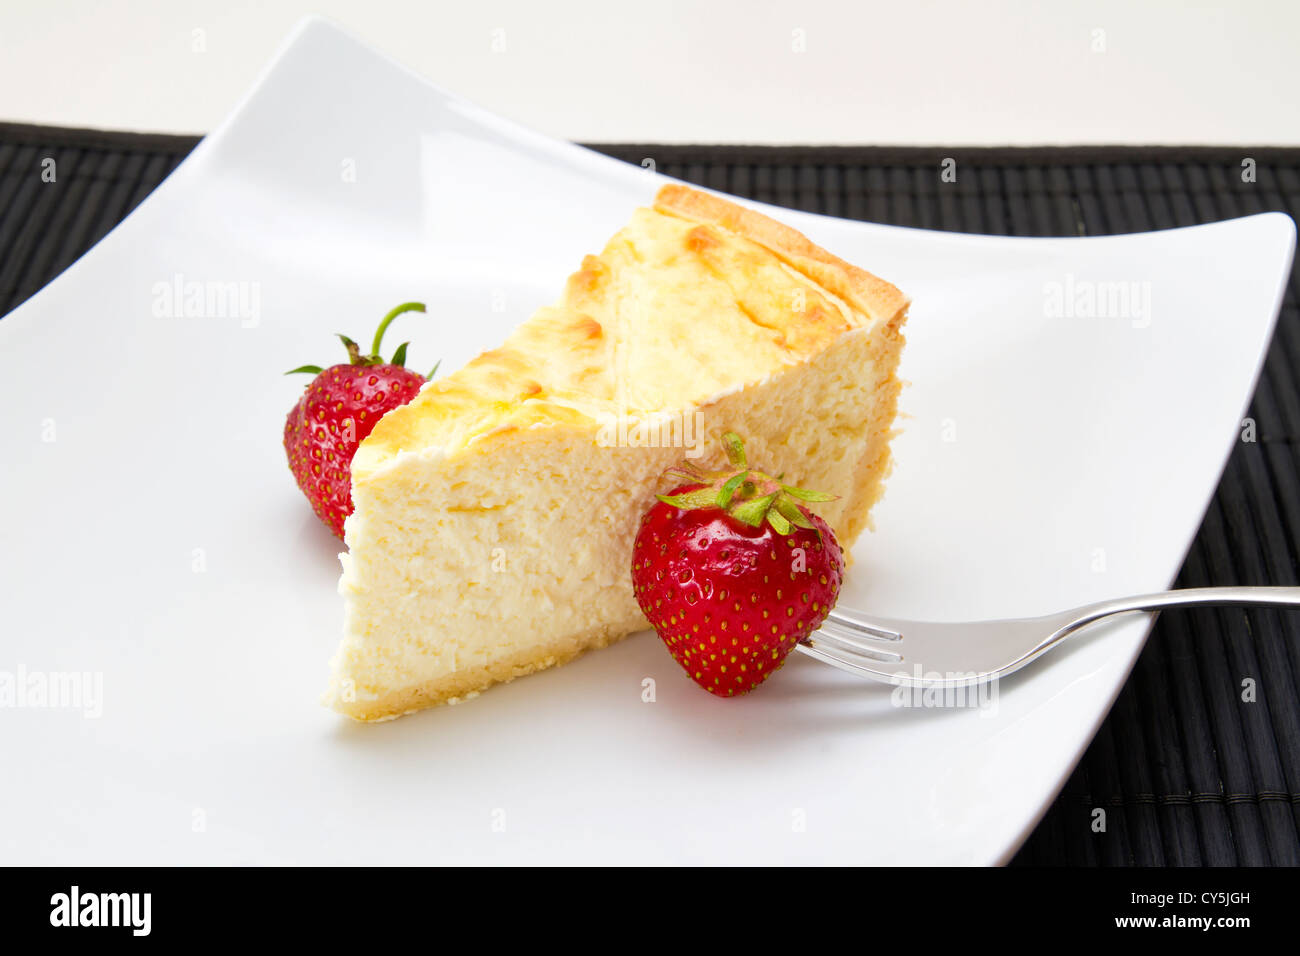 Cheesecake with strawberries and coffee Stock Photo